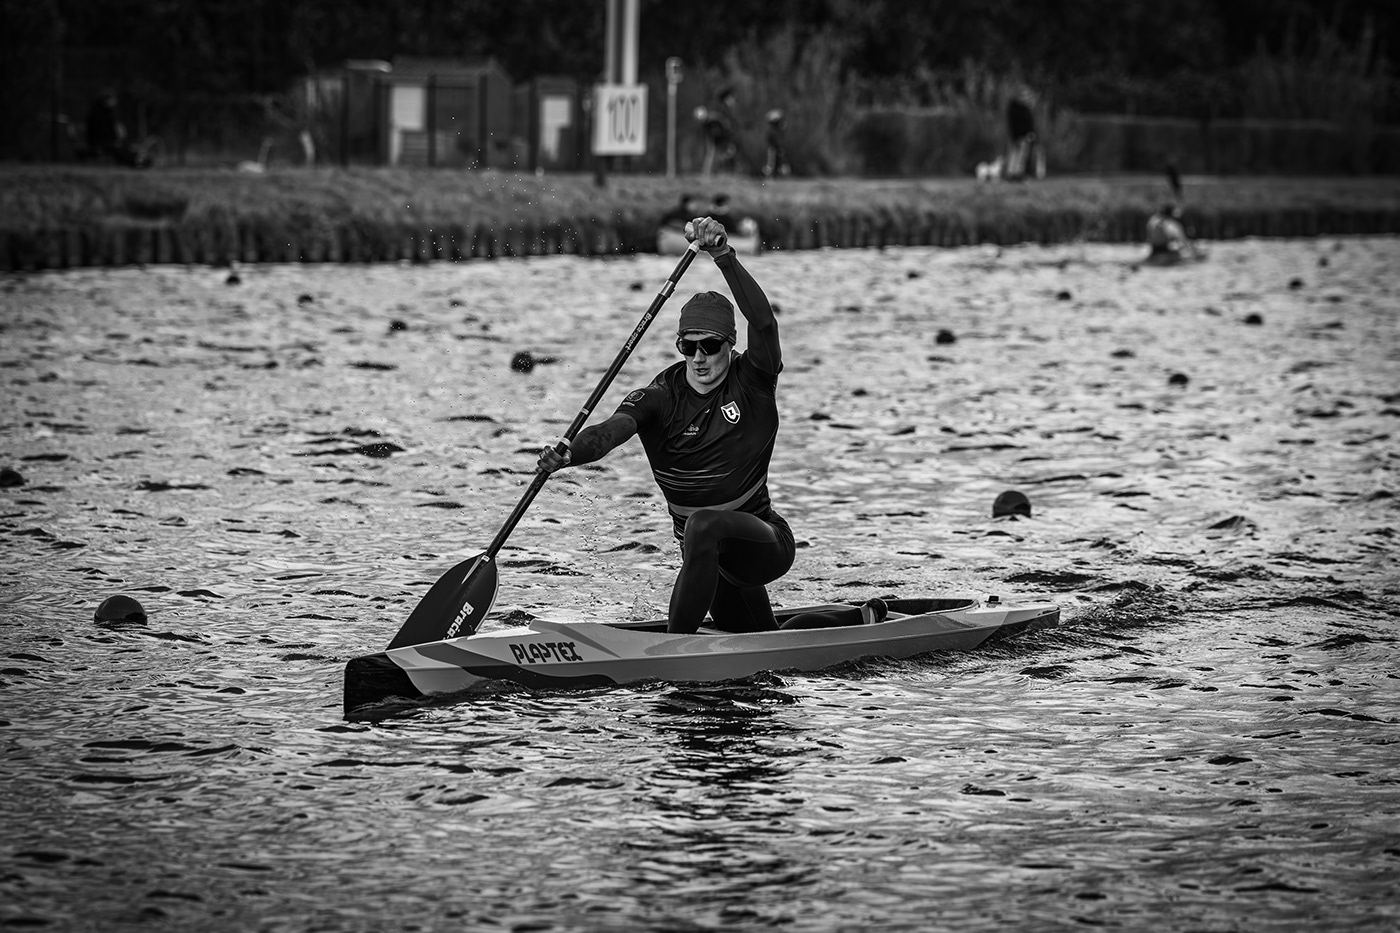 Outdoor water canoe kayak race sport Photography  black and white monochrome